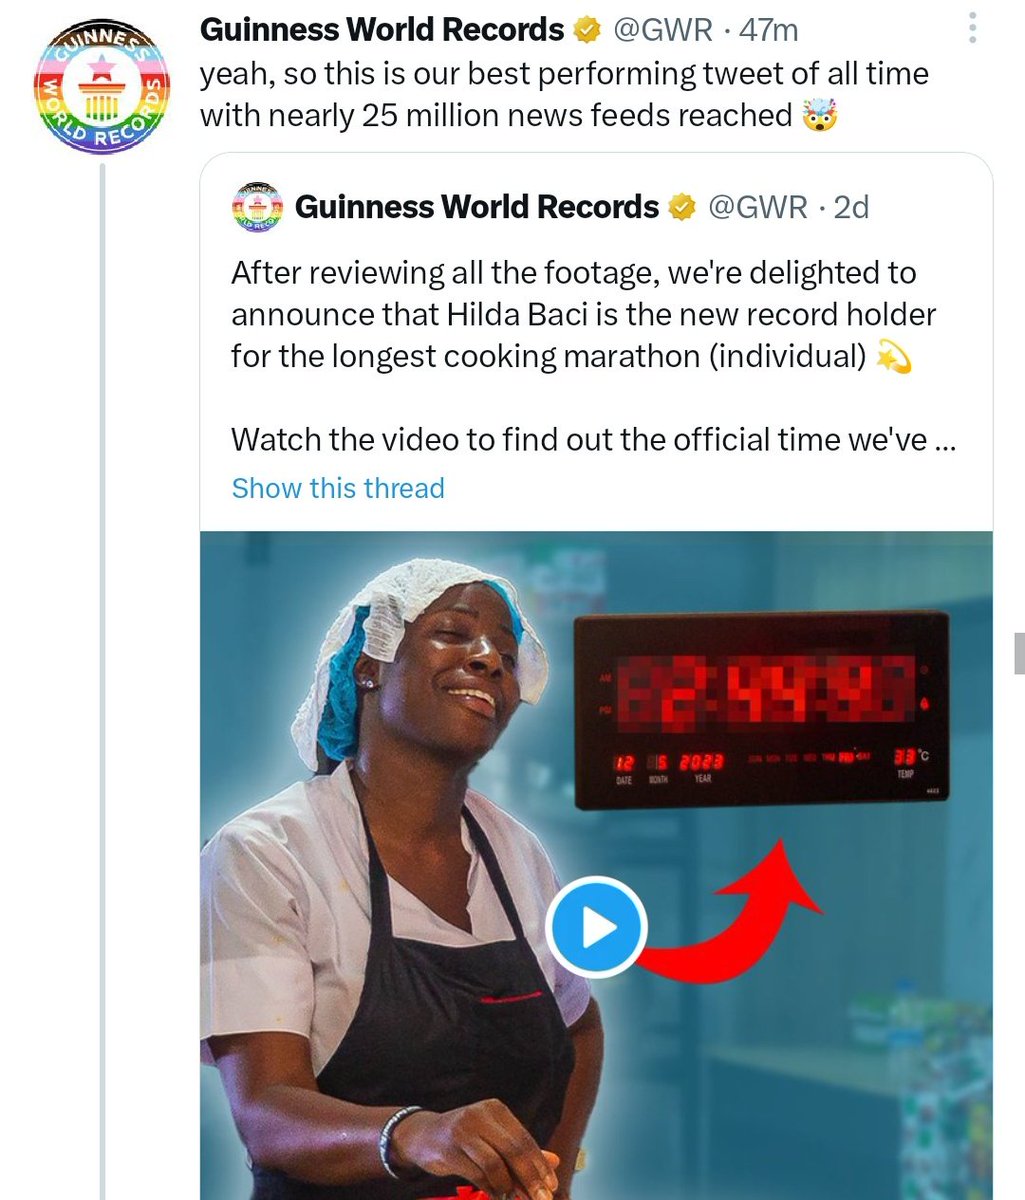 Hilda baci brakes another record. This time no cooking!

#hilda #100hrs #hildabacicookathon #hildabaci #GuinnessWorldRecord #Guinessbookofrecord #nigeria #usa #recod #100hrs #r4today #Netflix #naija